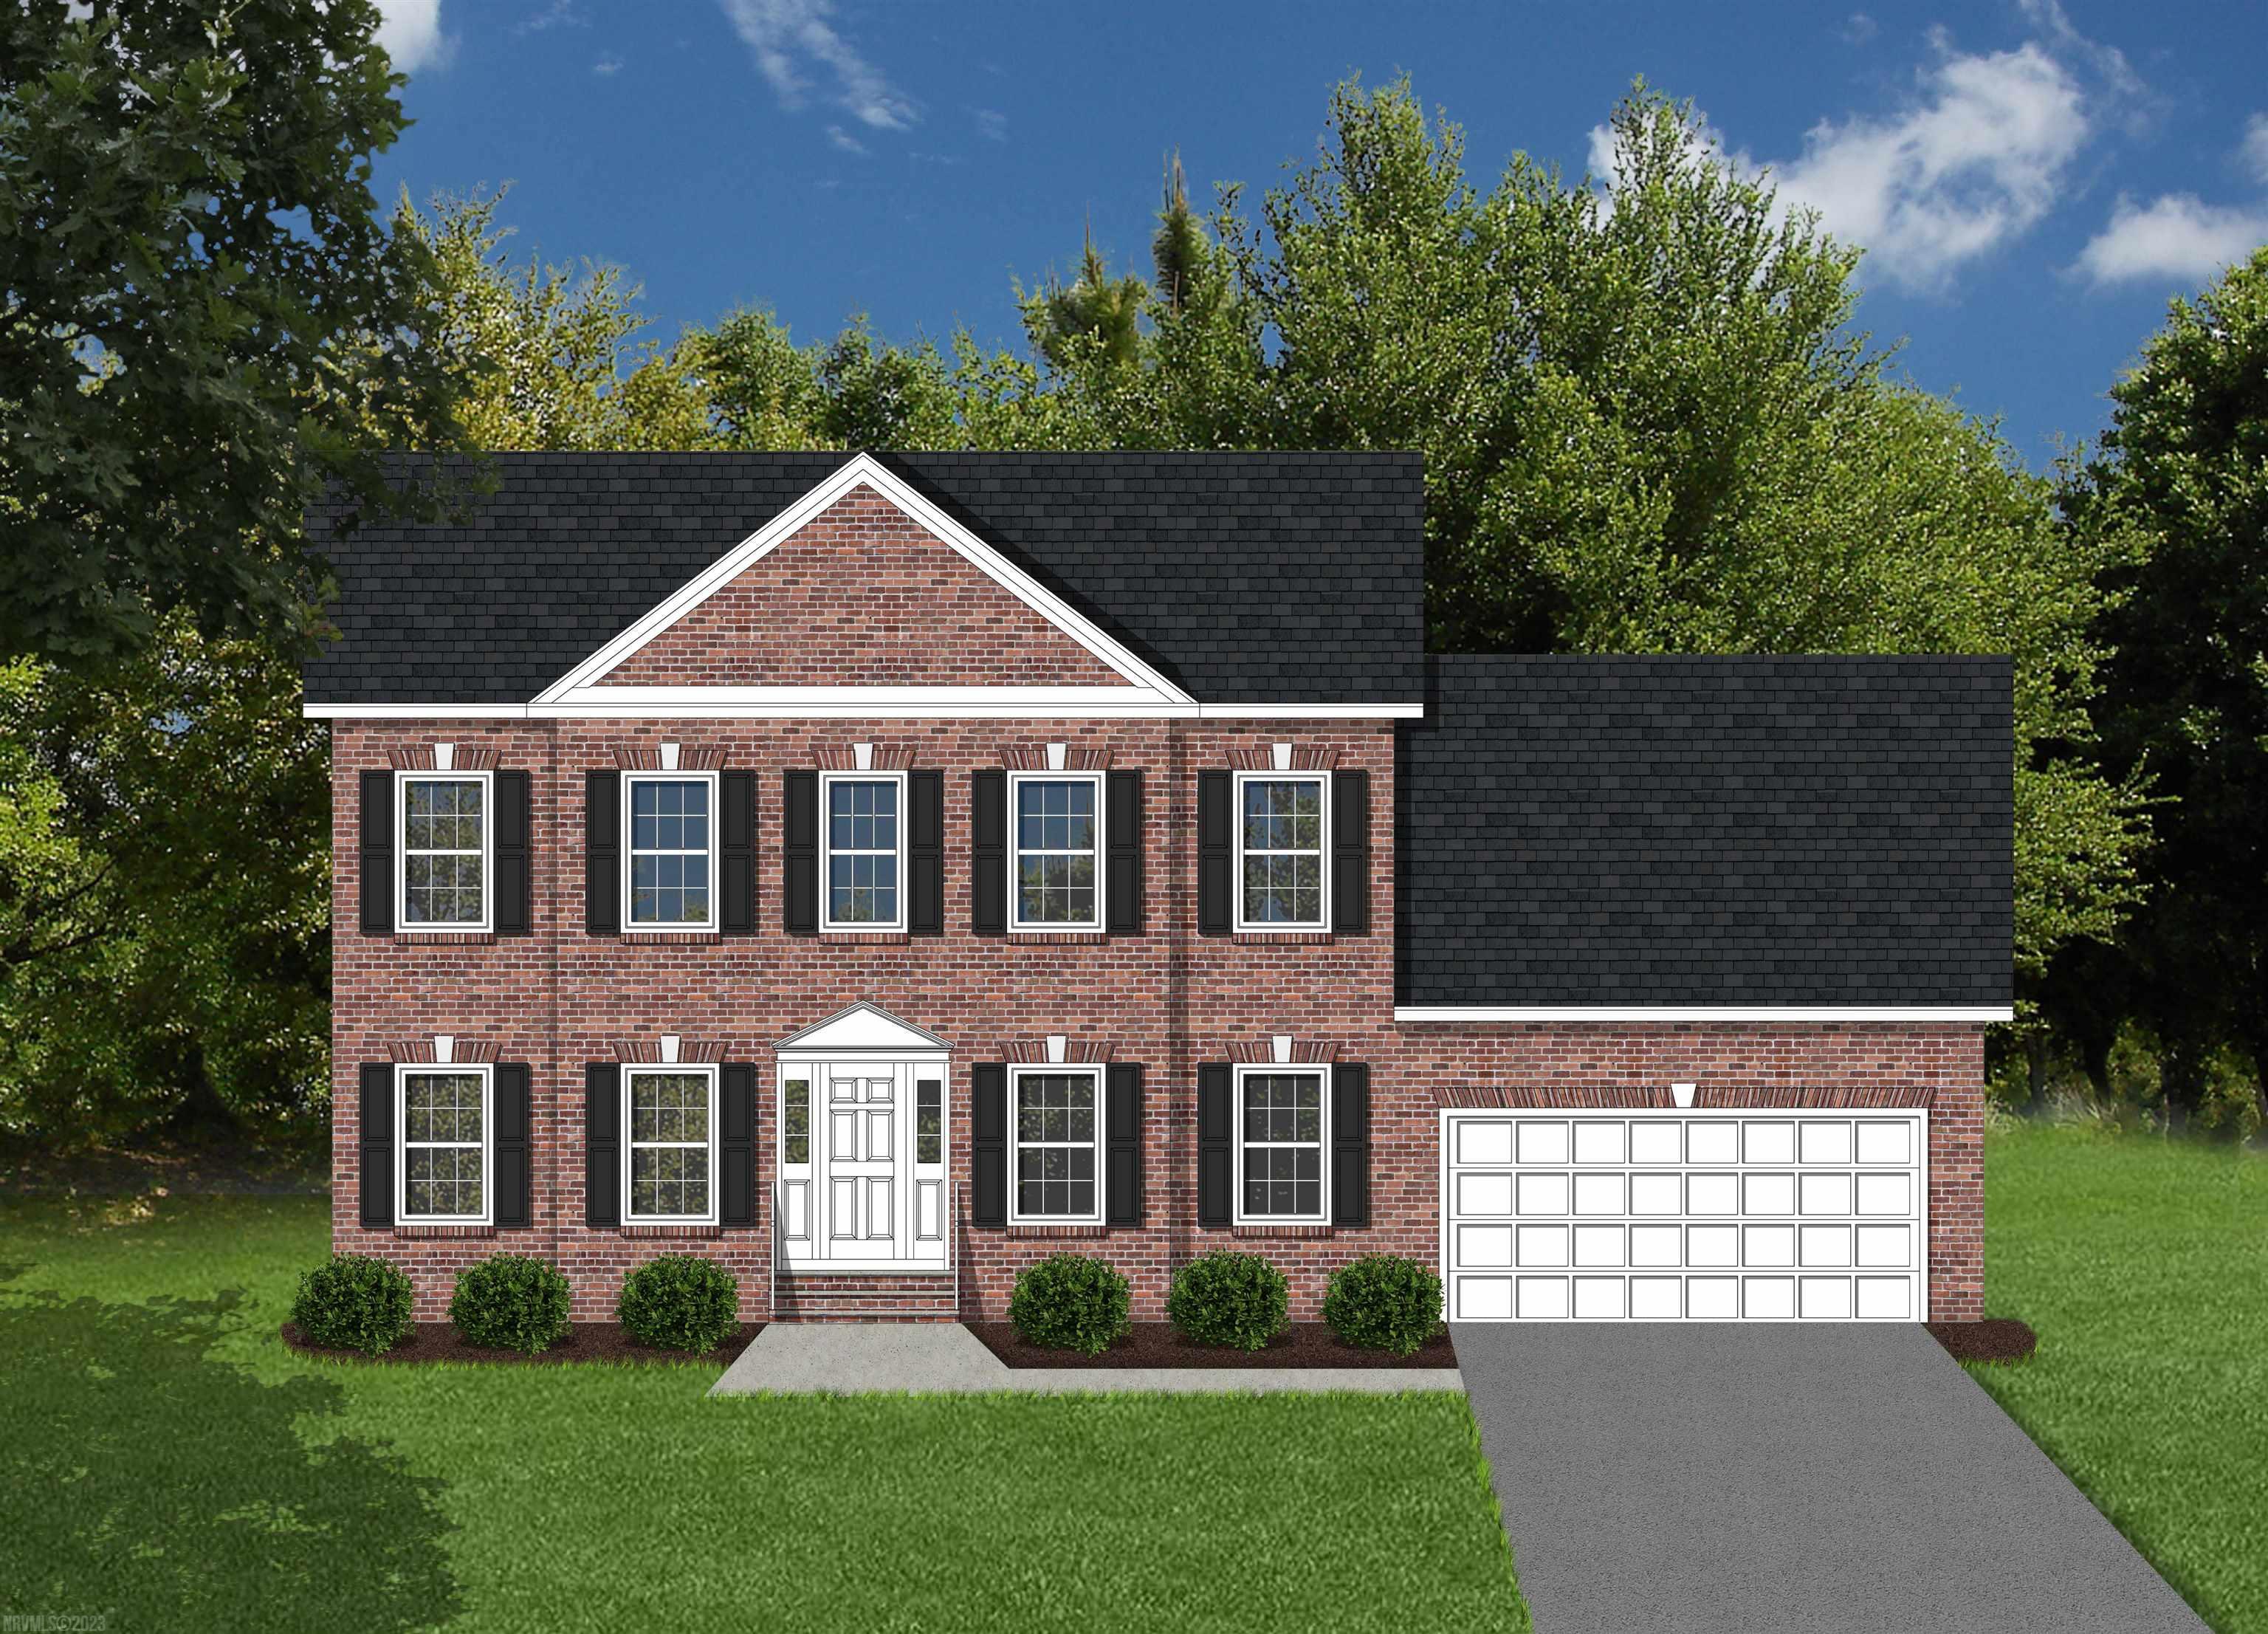 This is a pre-construction listing that is not yet built. NEW CONSTRUCTION! Our Lexington style home offers 2,228 square feet above grade, and 9’ framed walls on first floor with smooth drywall finish. This house plan incorporates hardwoods in the foyer, living, dining, kitchen, half bath upstairs hallway and master bedroom, ceramic tile in the baths and laundry, and carpet throughout remaining bedrooms. Oak treads to the second floor. The master shower offers ceramic tiled walls! Premium Tahoe cabinets by Timberlake in the kitchen and bathroom with granite countertops make the home even more beautiful. Crown molding can be found in the dining room and master bedroom, as well as chair rail with wainscoting in the dining room. The exterior finishes consist of double-hung windows, brick, siding, and architectural shingles.